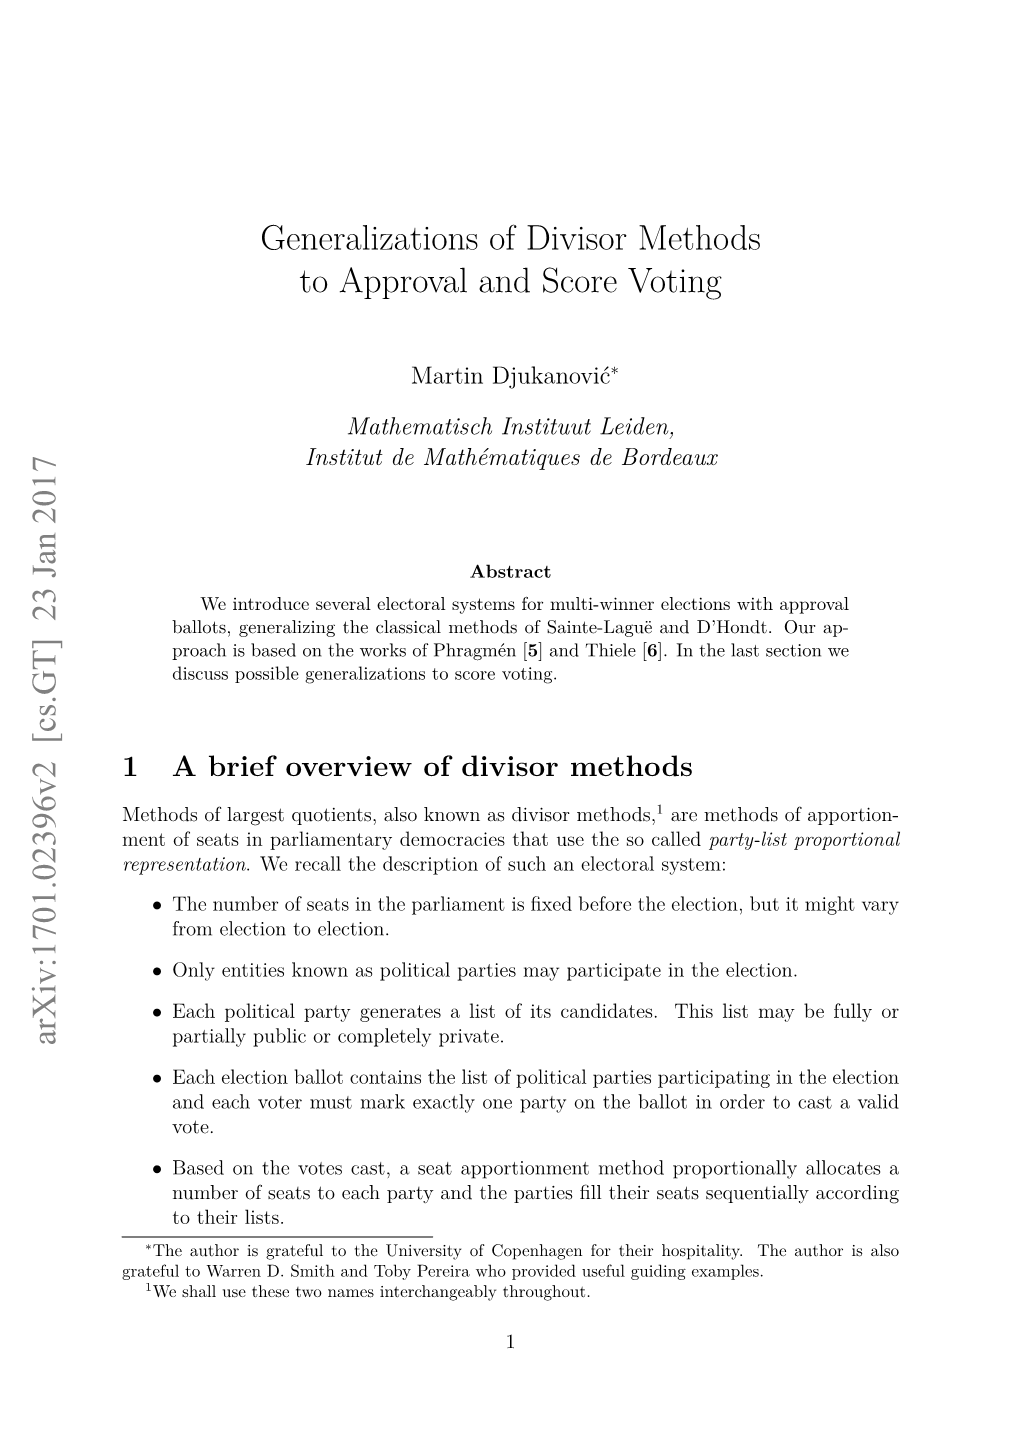 Generalizations of Divisor Methods to Approval and Score Voting